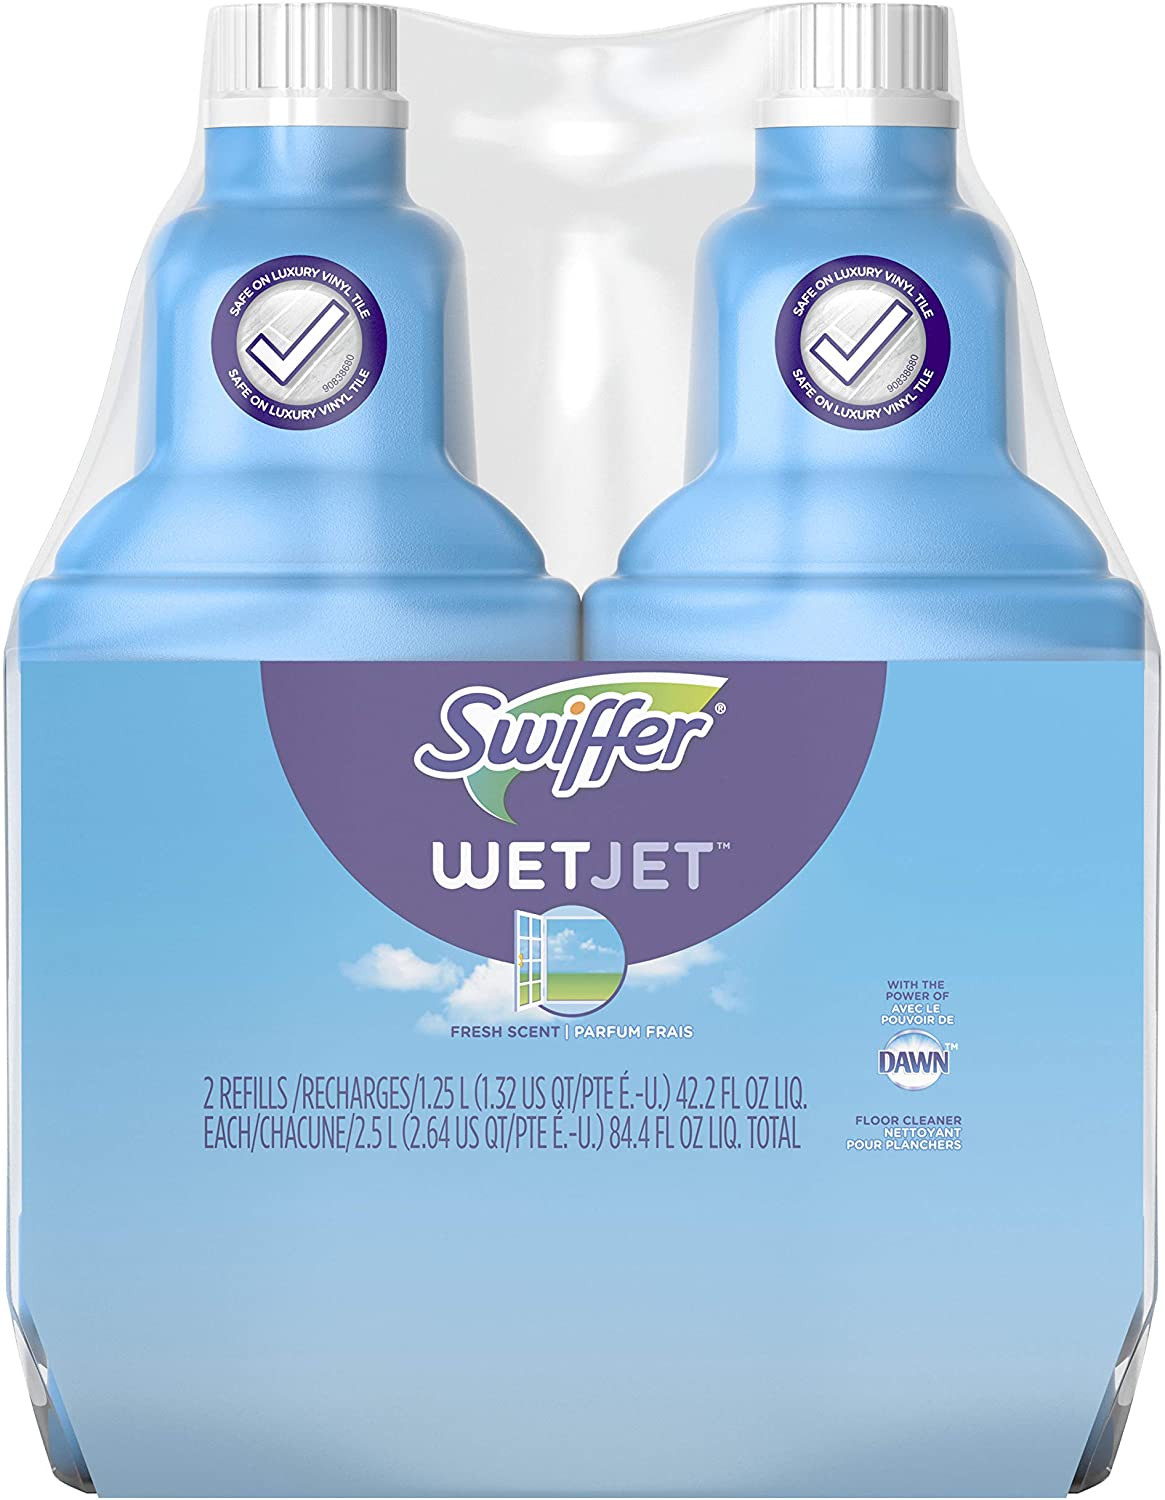 2-Pack 1.25-L Swiffer WetJet Multi-Purpose Floor Cleaner Solution Refill (Open Window Fresh Scent) $6.25 w/ S&S + Free Shipping w/ Prime or on $25+